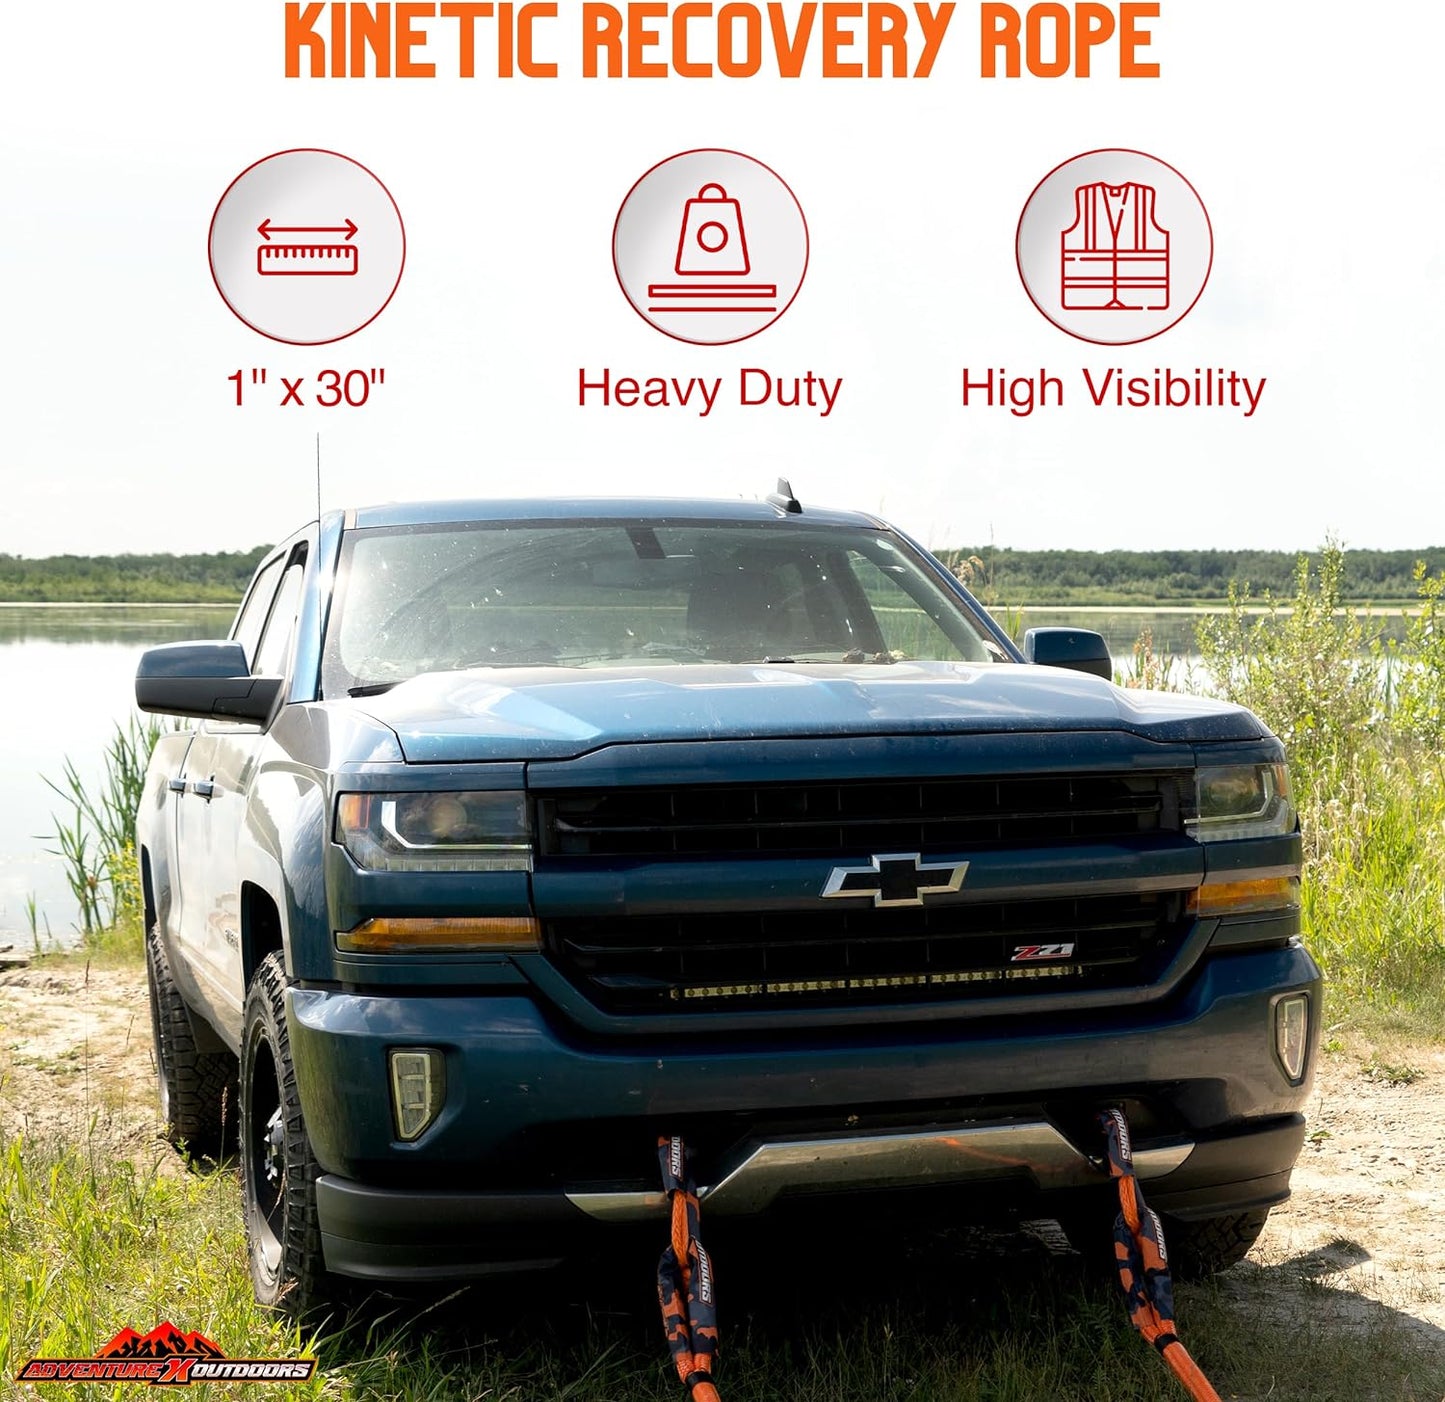 Adventure X Outdoors (1in x 30ft) Kinetic Recovery Rope (34,370lbs)- Off-Road Kinetic Tow Rope, Kinetic Rope Kit Includes Orange Camo Storage Bag and 1/2 x 20 Soft Shackles